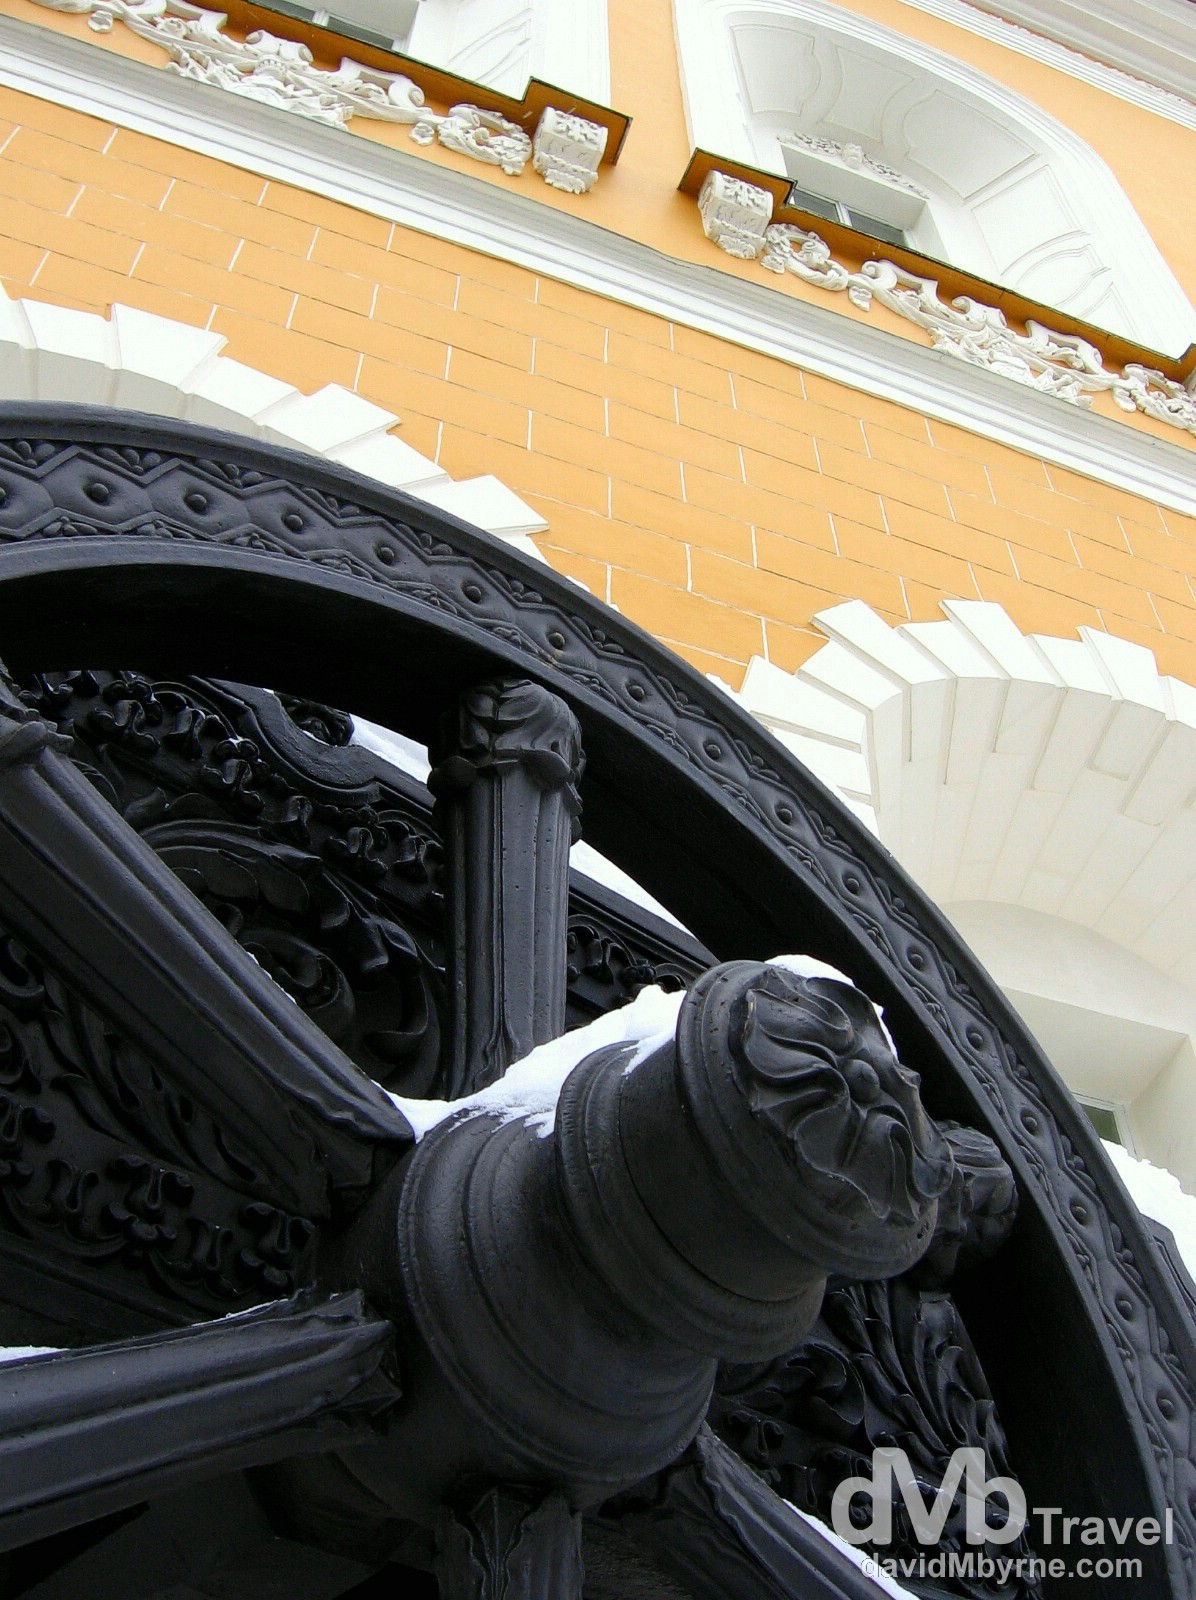 A decorative Napoleonic cannon in the grounds of the Kremlin in Moscow, Russia. February 26th, 2006.